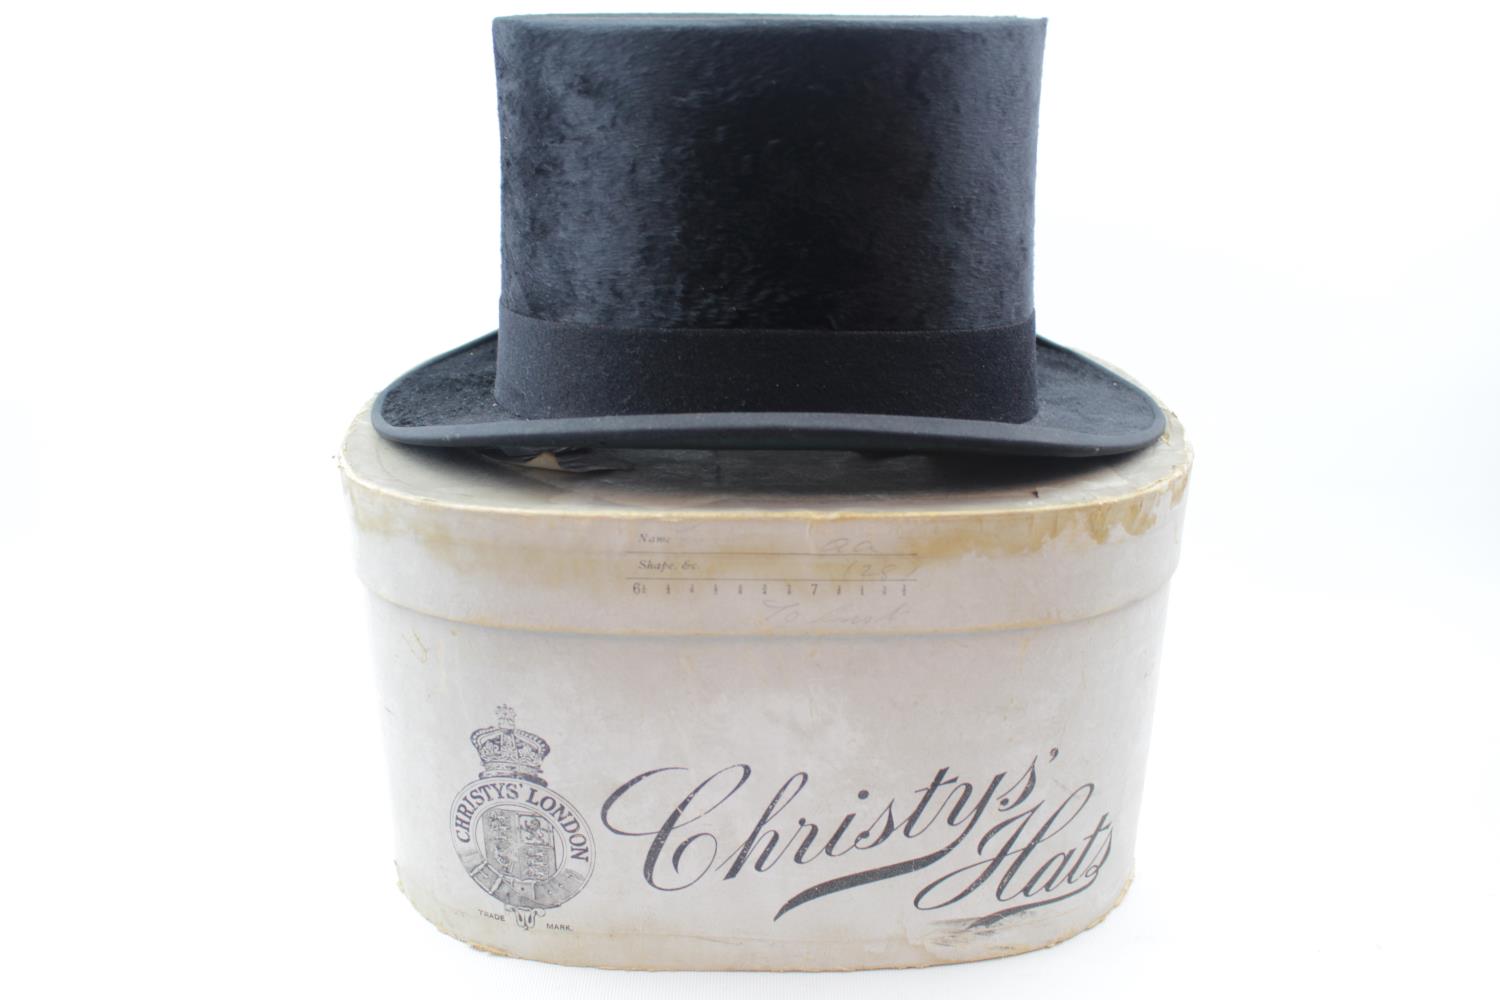 Boxed Christys of London Moleskin Top Hat retailed by Everett & Sons Hatters of Ipswich Colchester